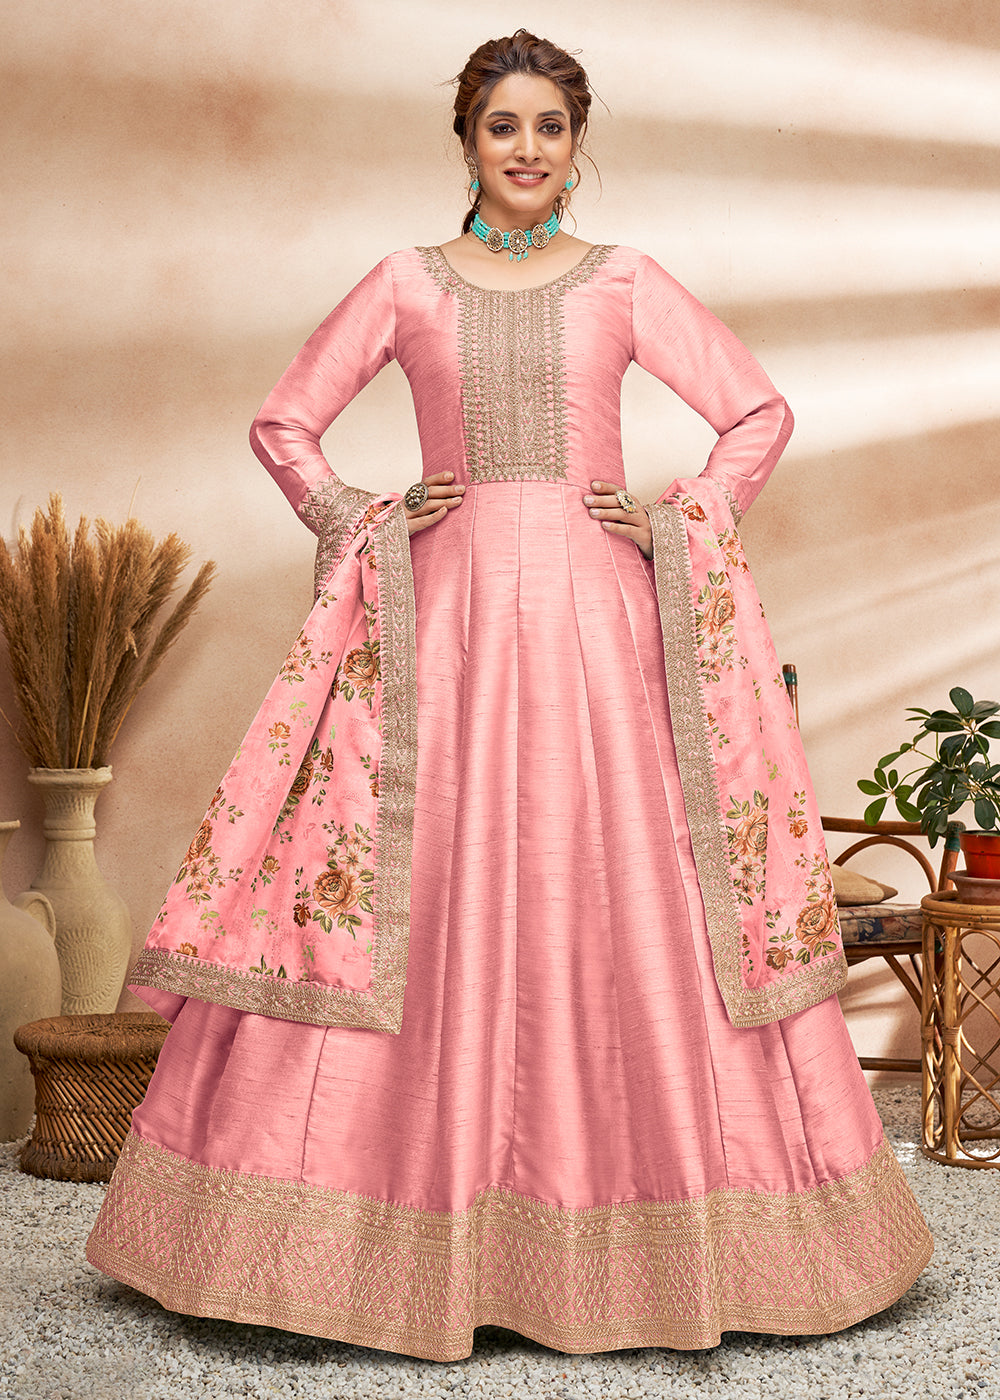 Buy Now Pretty Pink Art Silk Embellished Wedding & Party Anarkali Dress Online in Canada at Empress Clothing. 